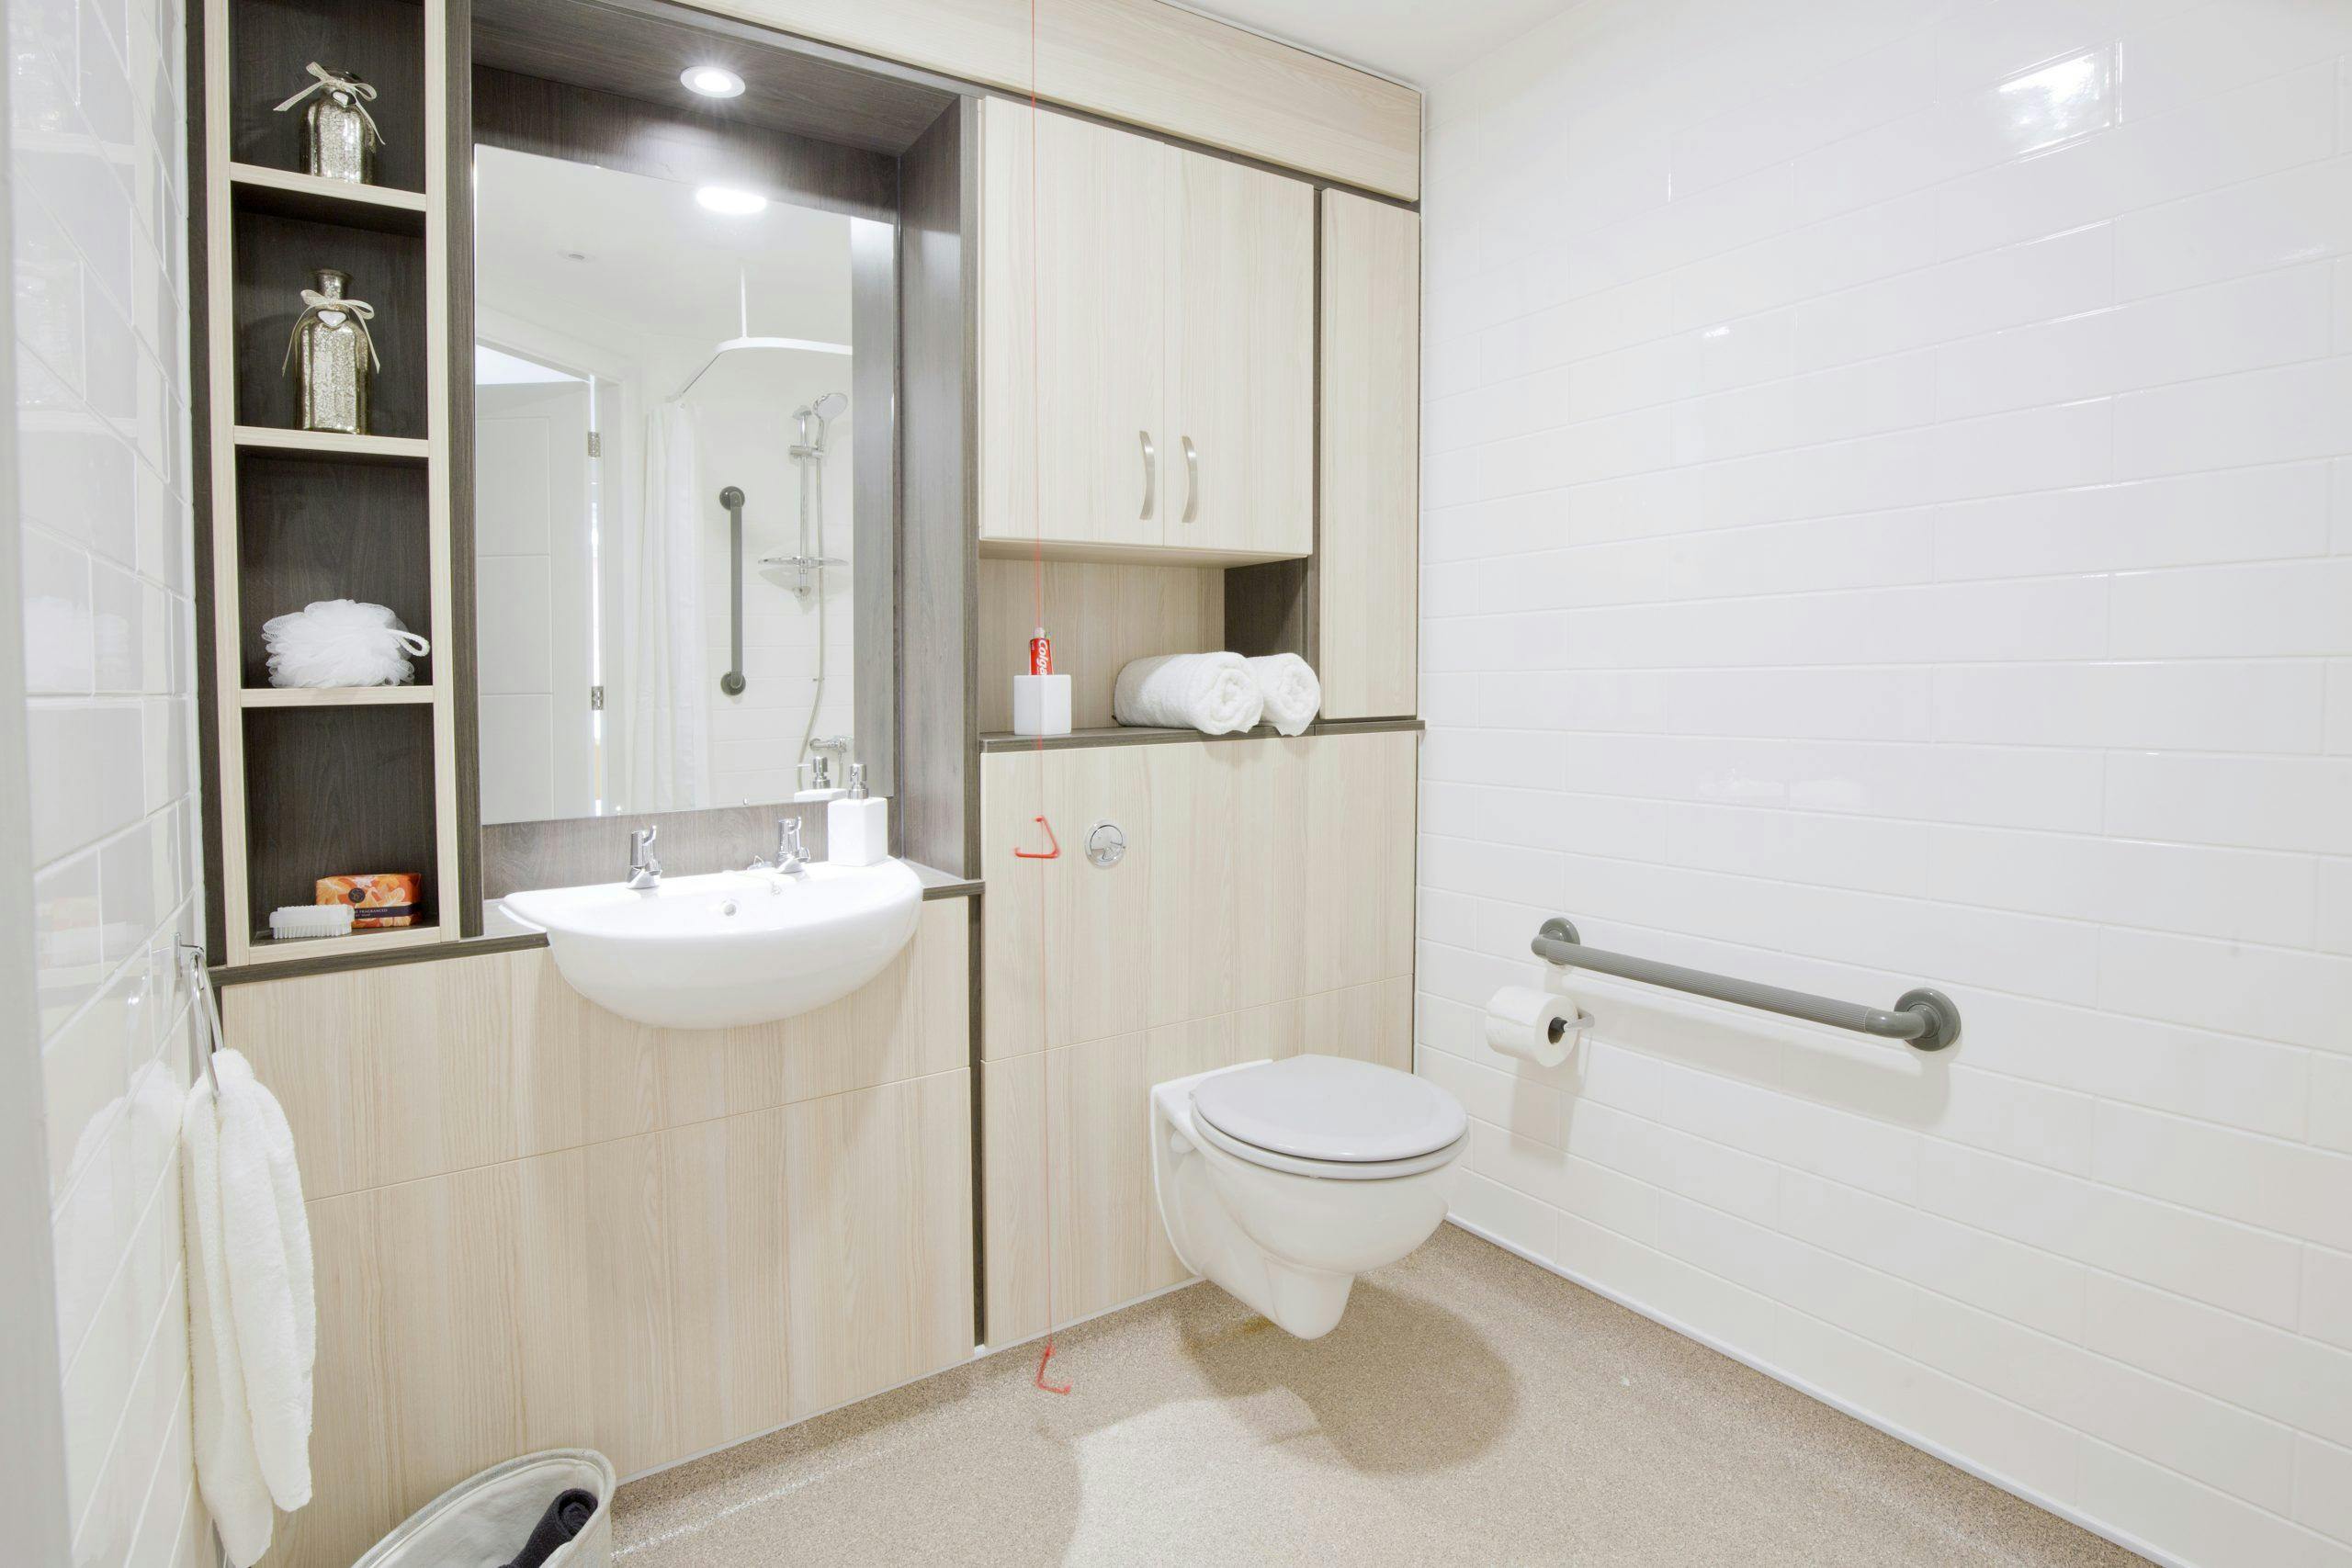 Bathroom at Henley House Care Home, Ipswich, Suffolk